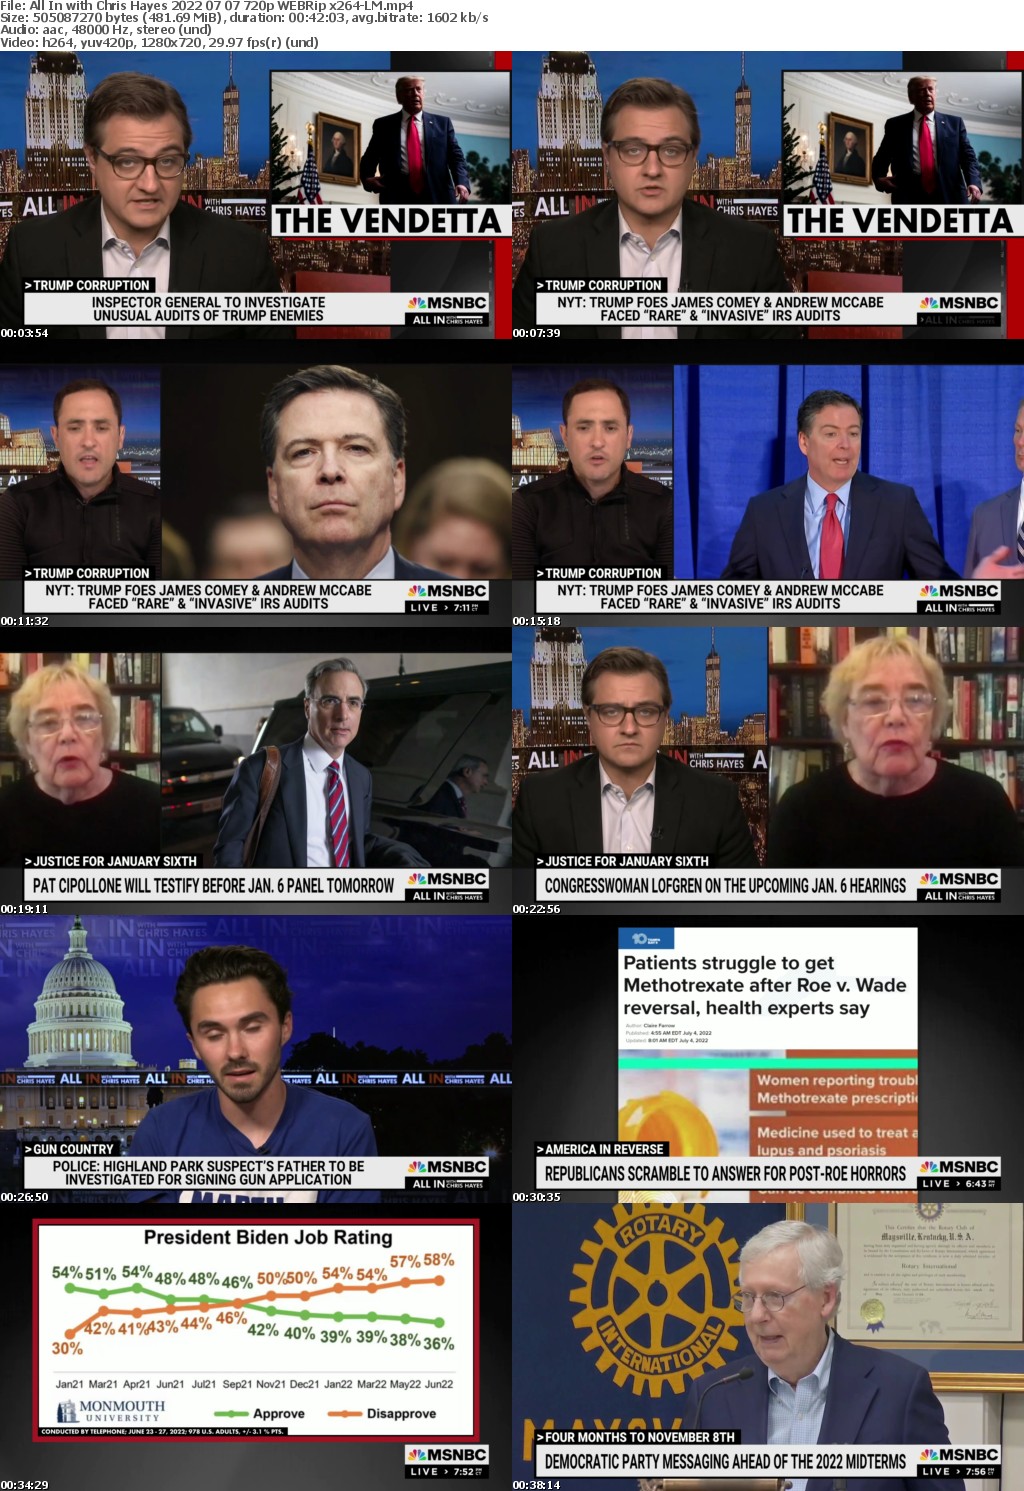 All In with Chris Hayes 2022 07 07 720p WEBRip x264-LM